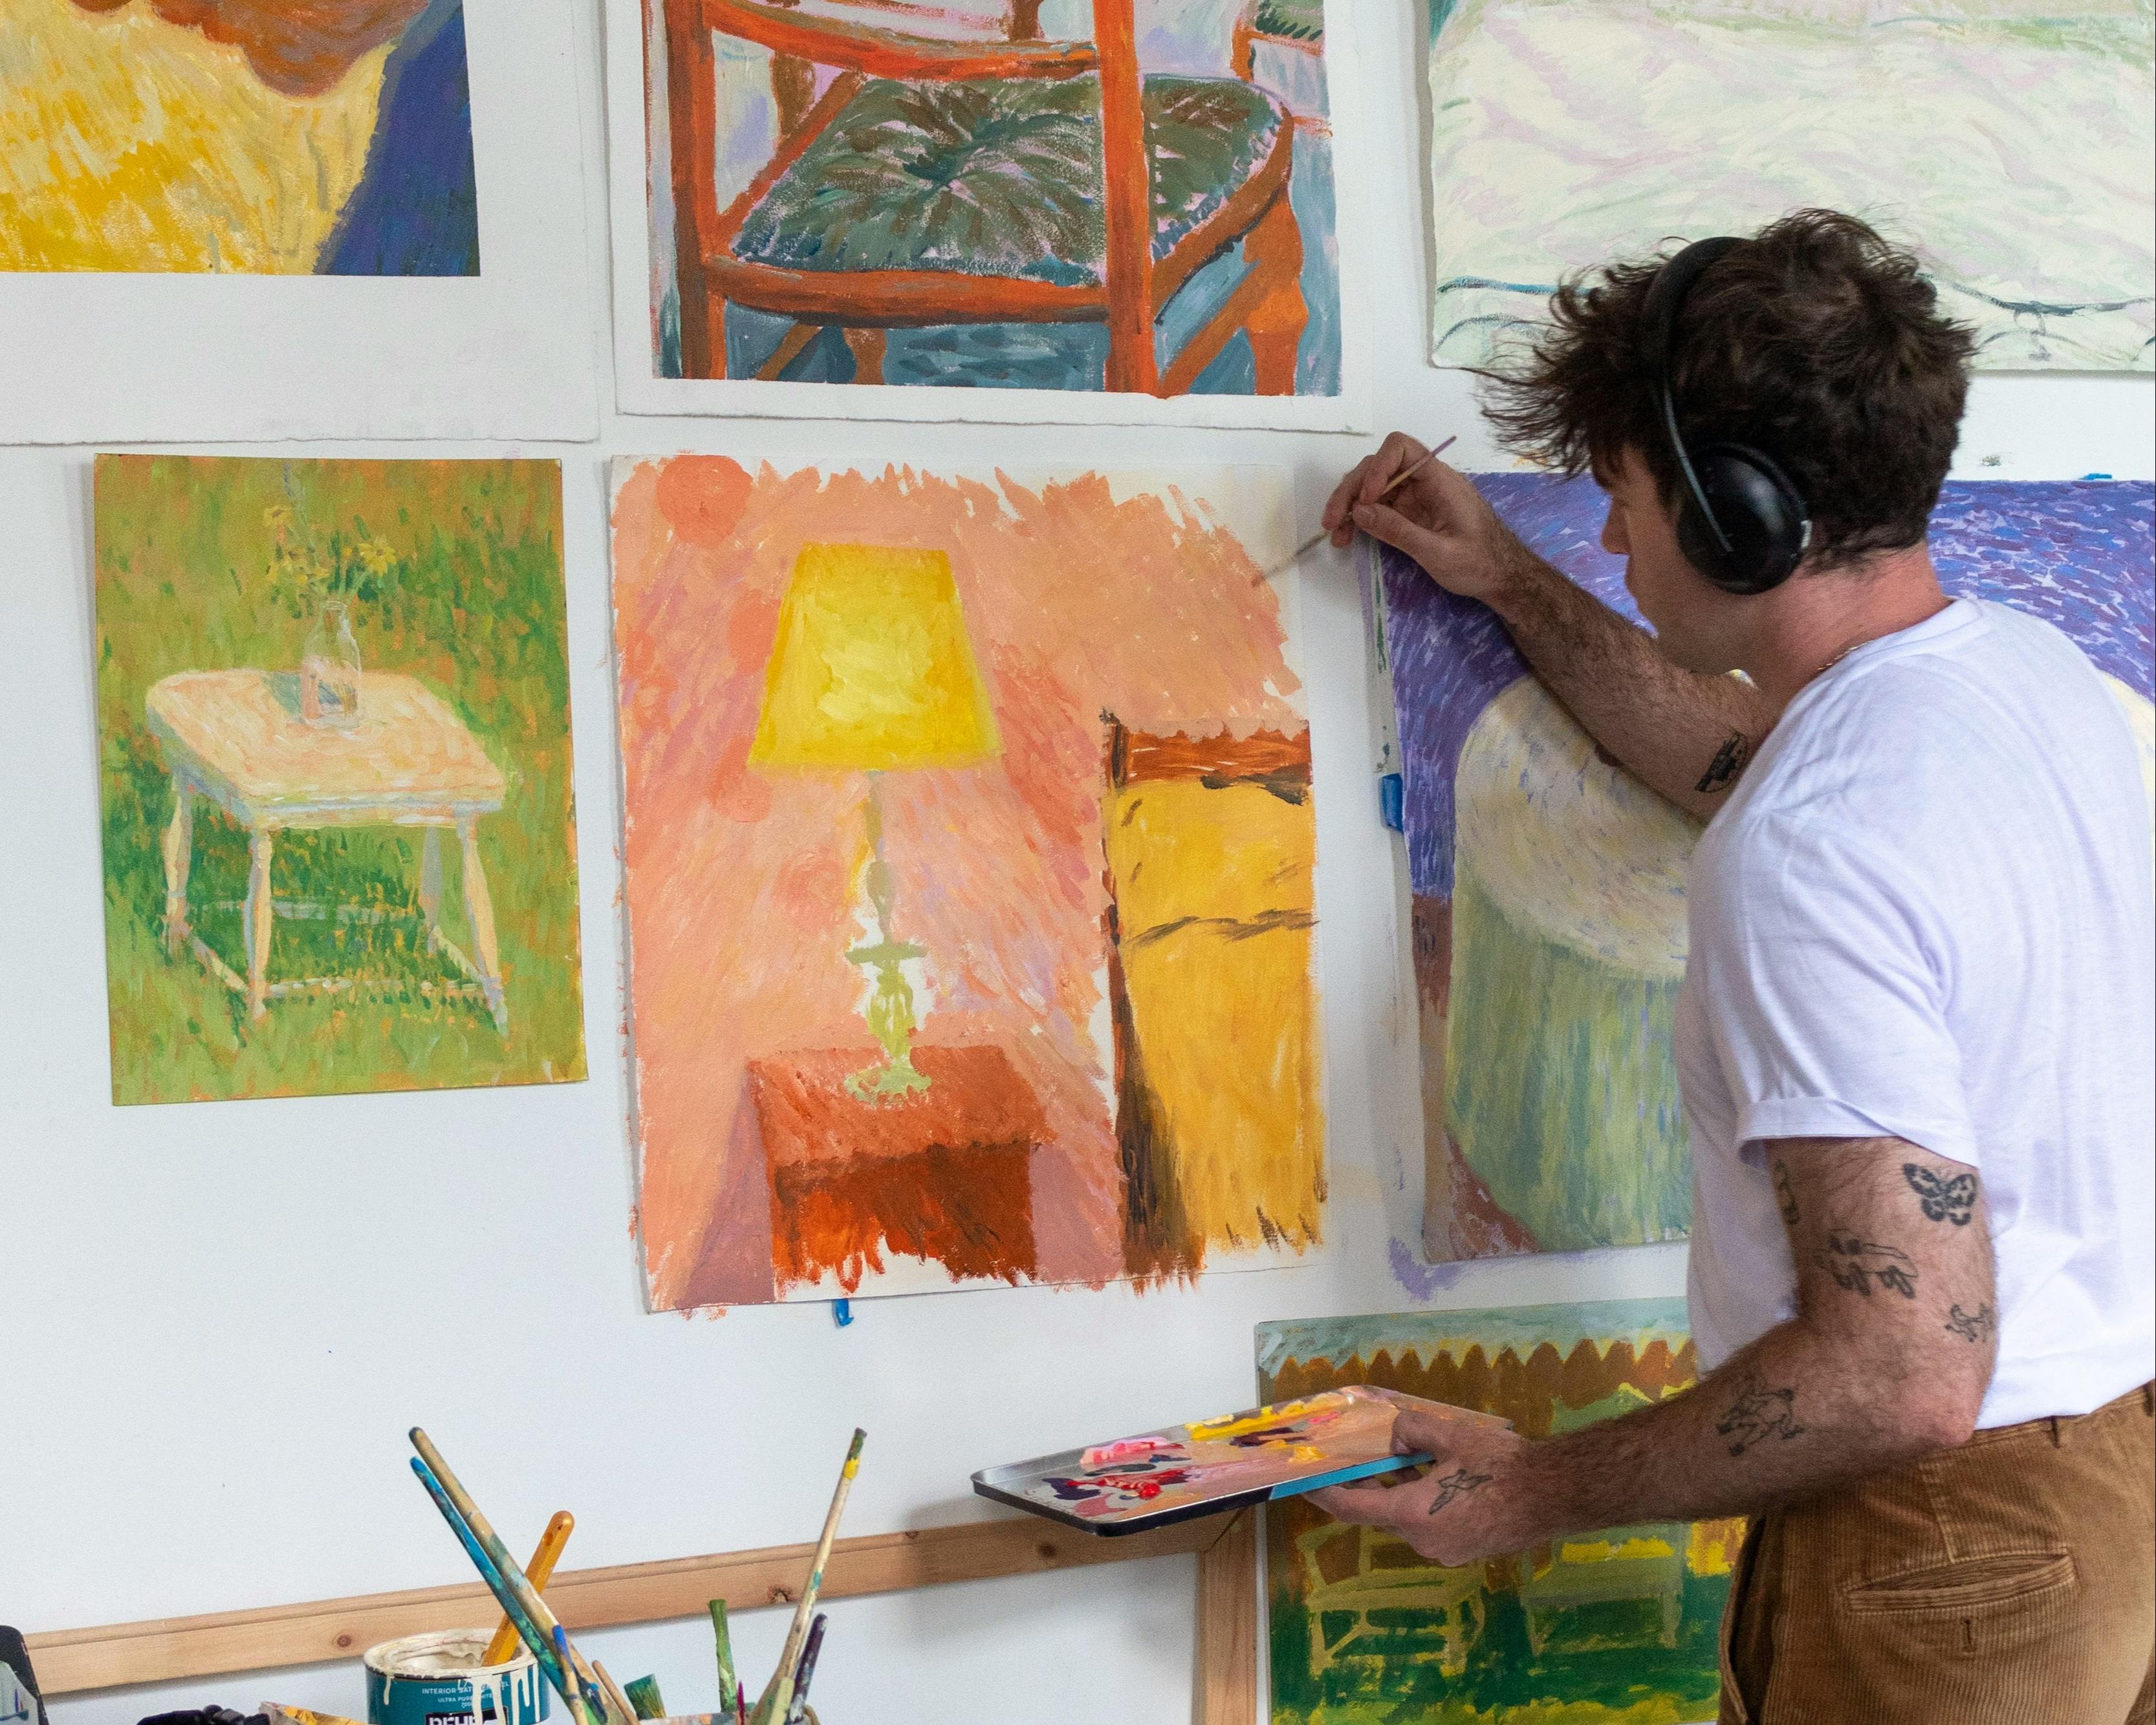 Artist Jackson Joyce wearing over the ear headphones and painting a still life work on paper installed on a white wall in his studio.